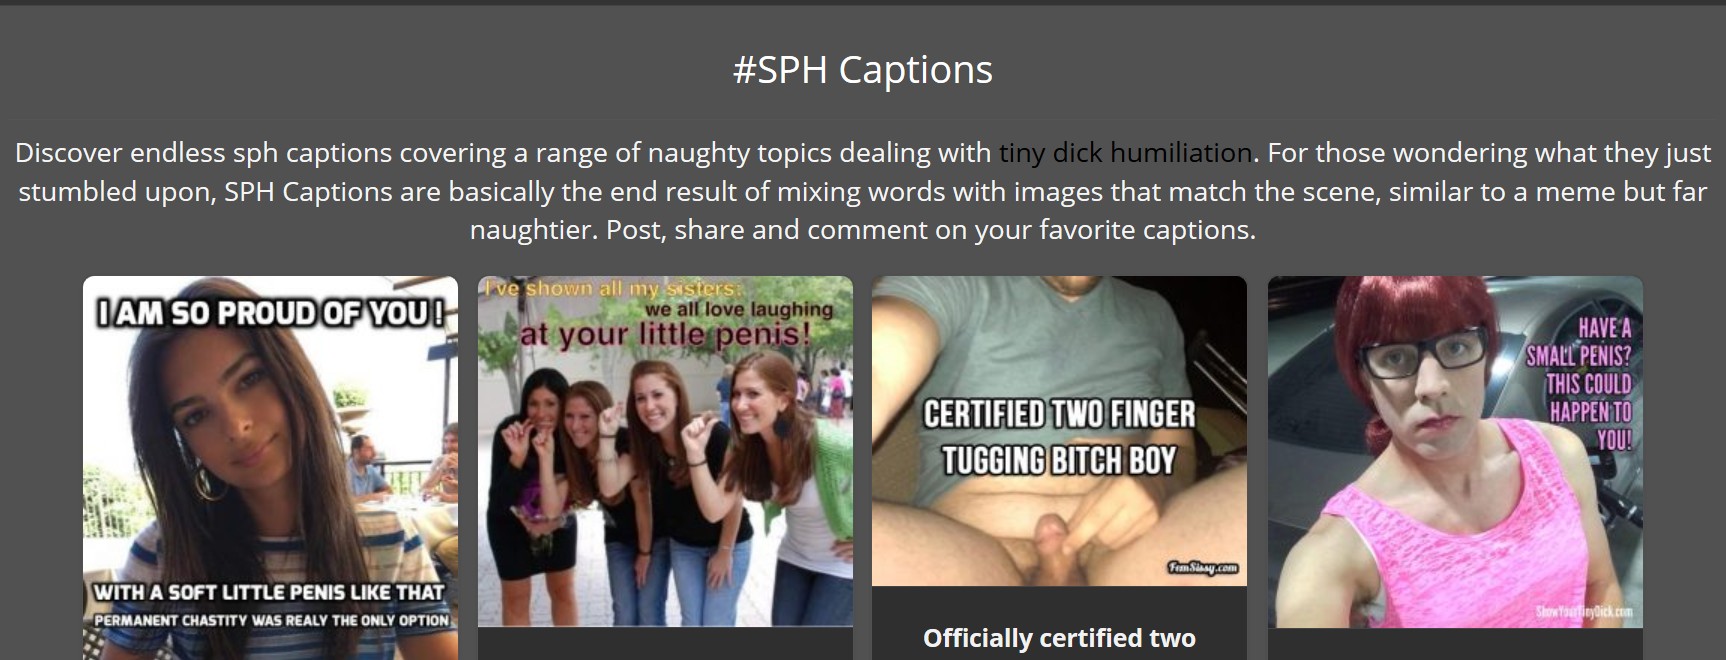 SPH captions on freakden.